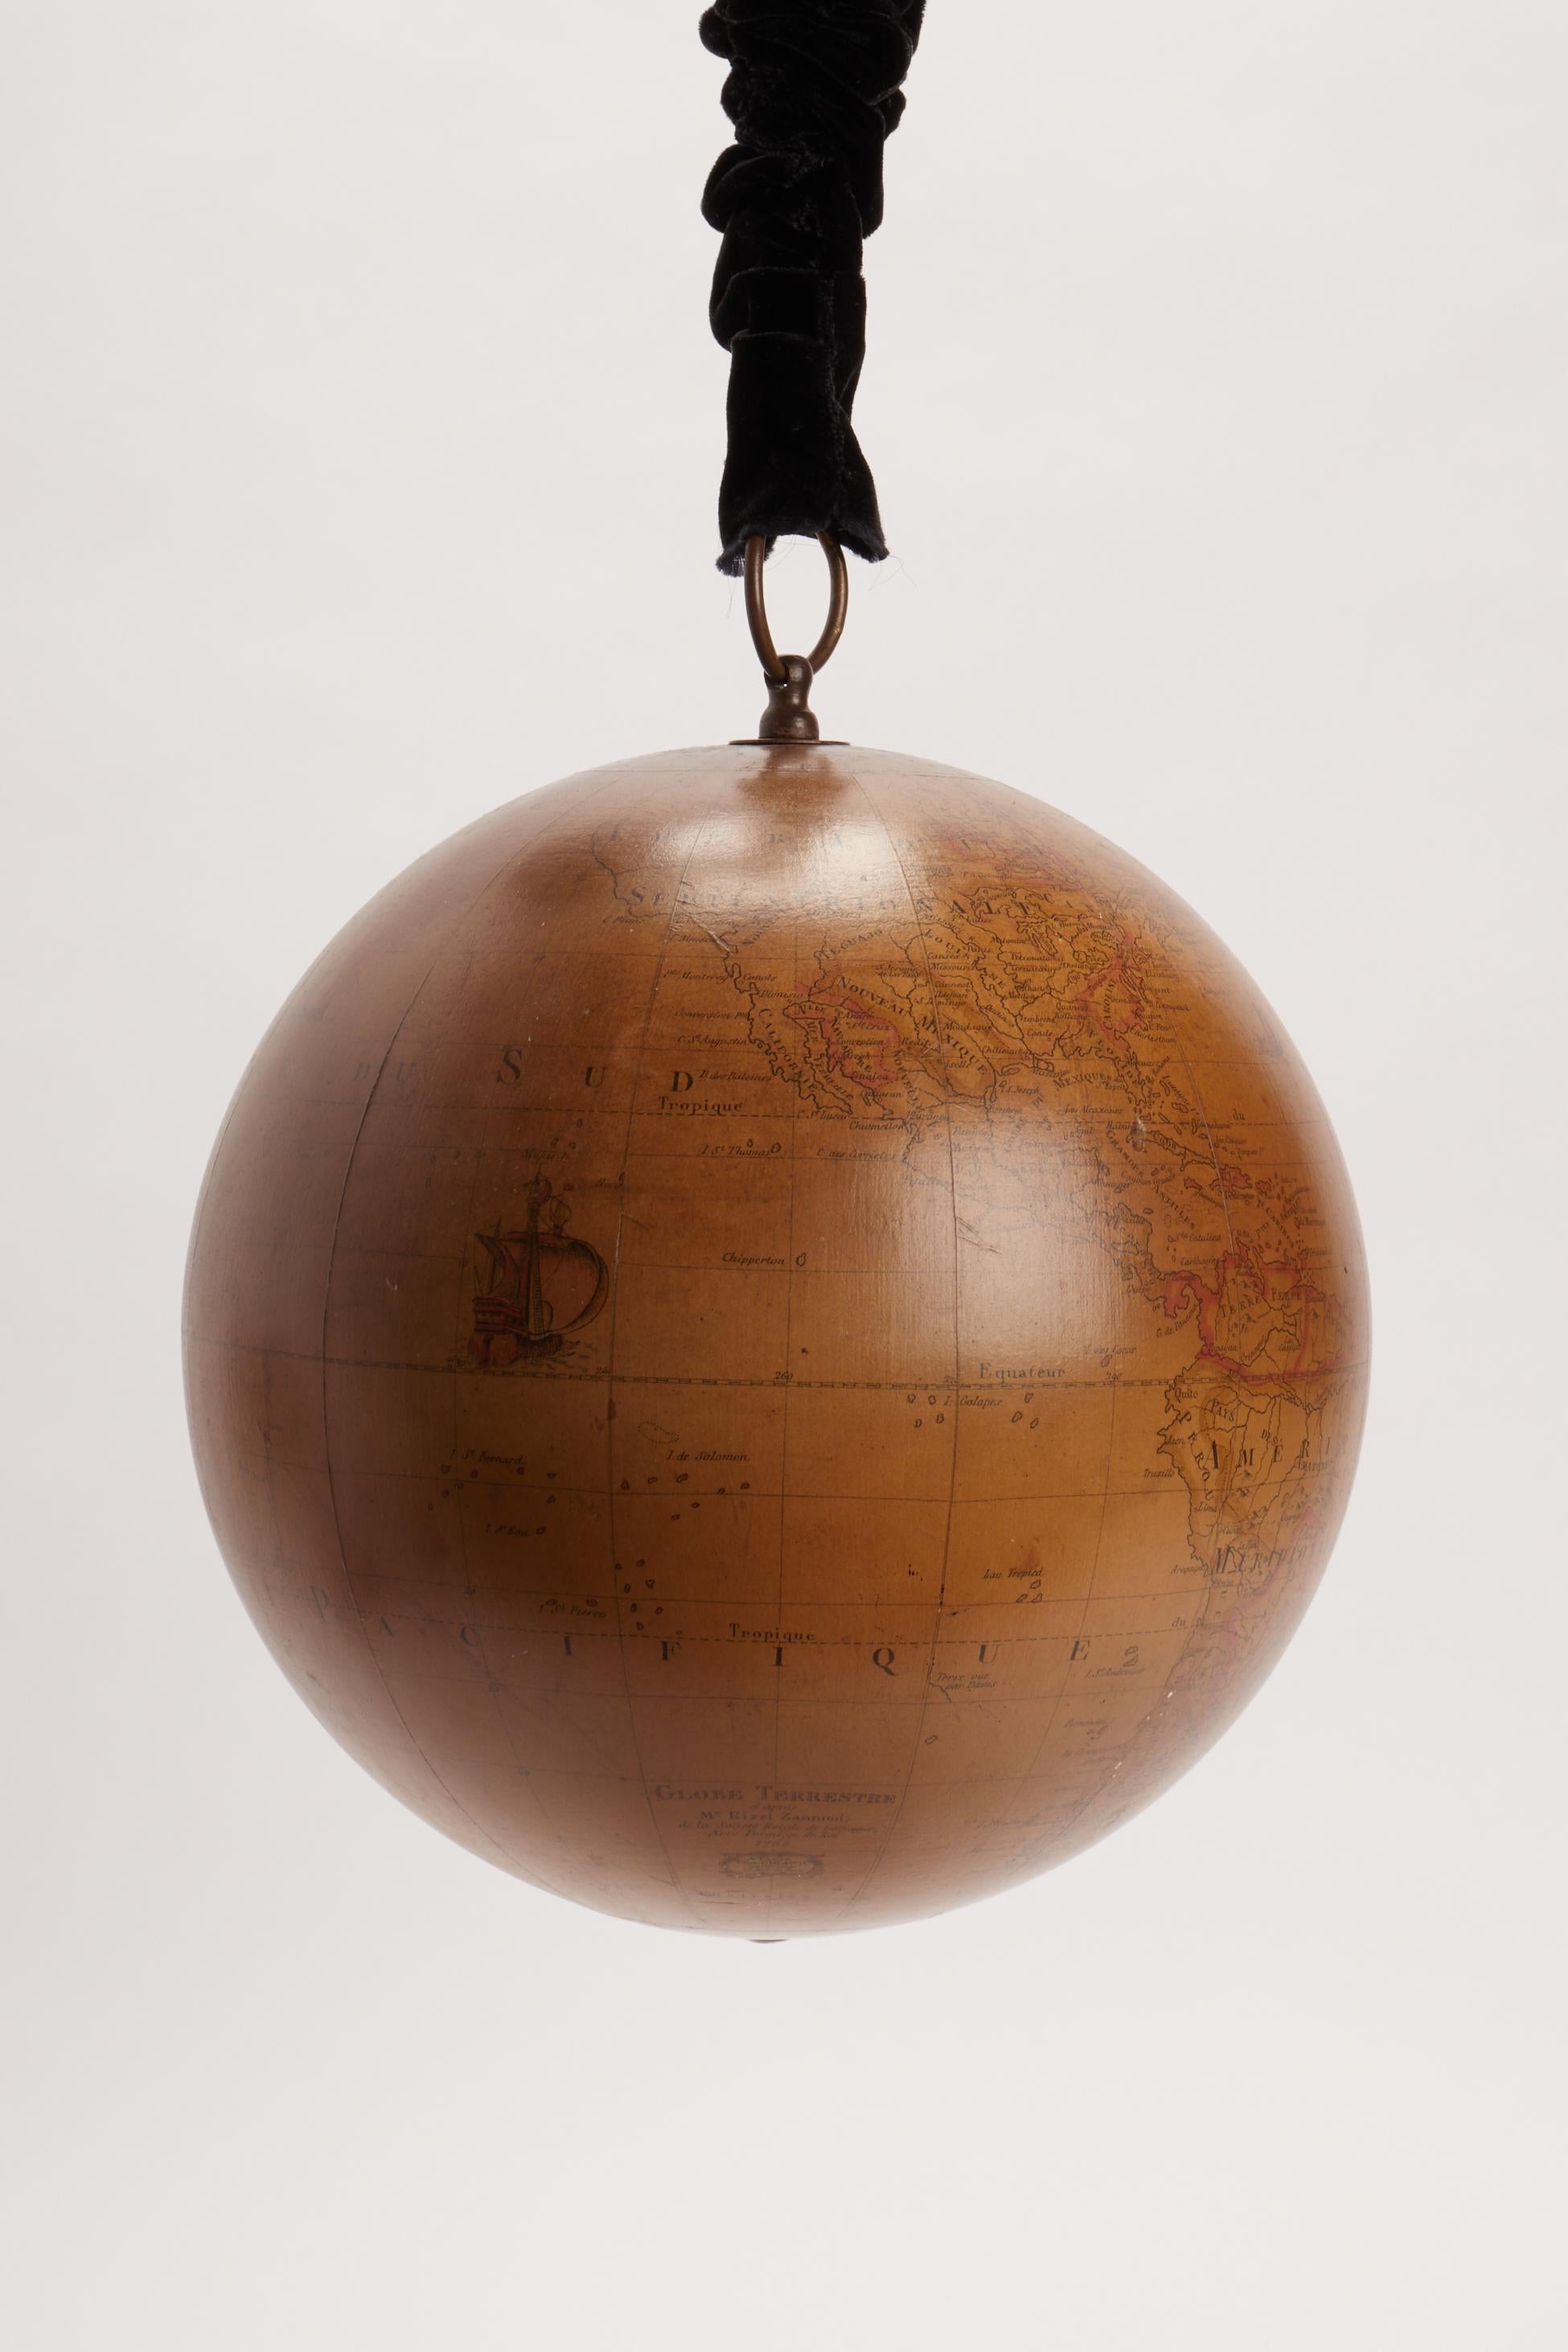 Designed, created, and built to be hanged to the ceiling in order to spin and play with it. Rare are the cases of pre-revolutionary French globes, and most of all the swinging ones. In excellent conditions and original patina, no losses or